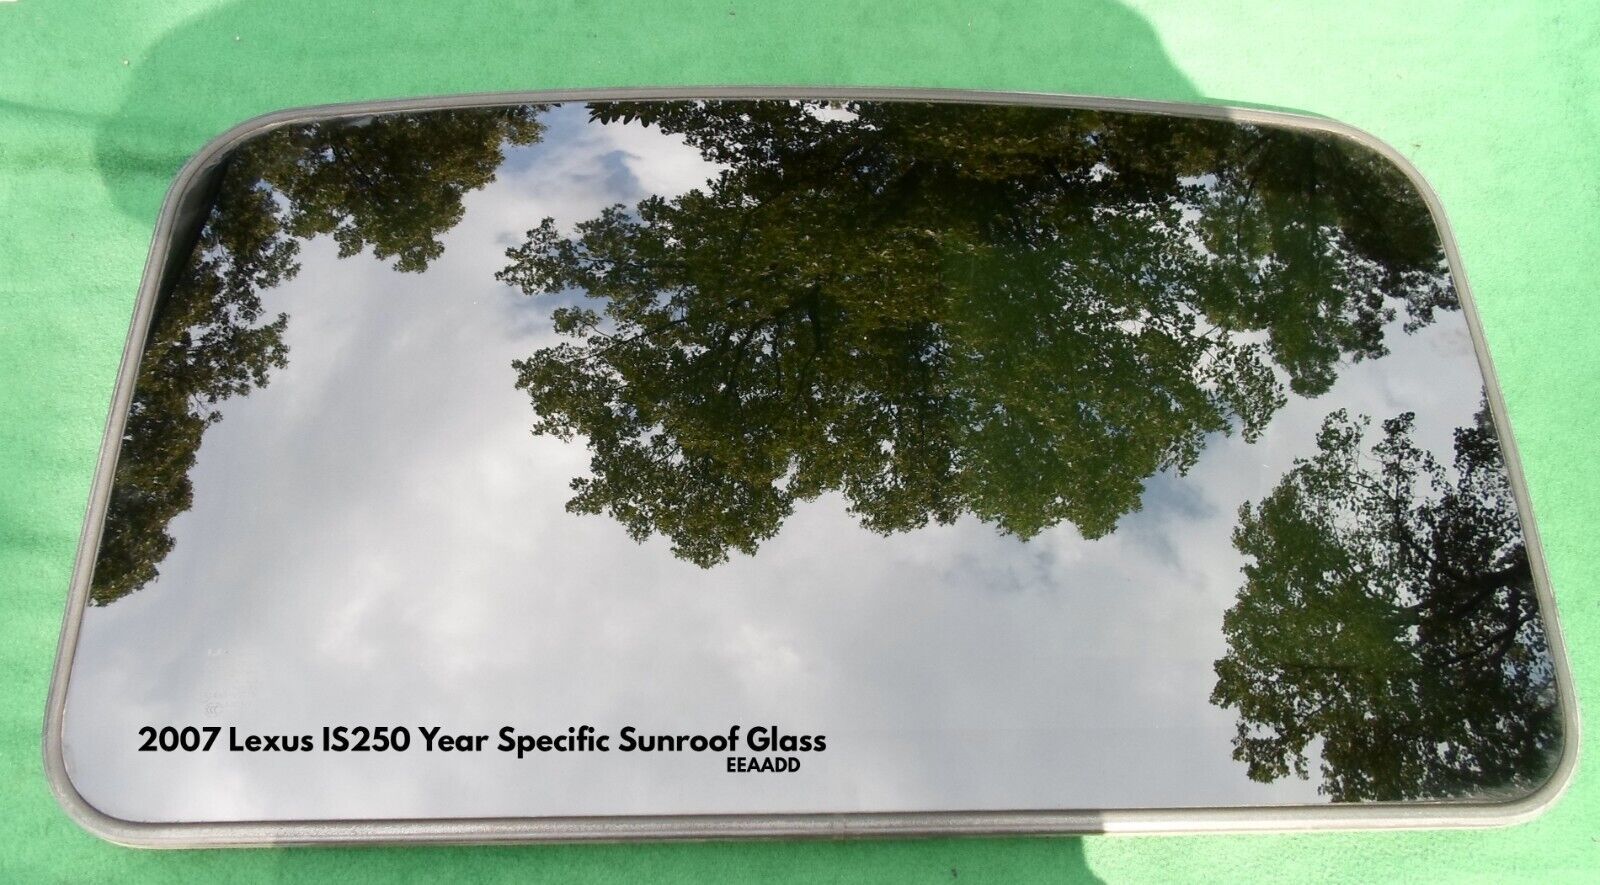 2007 LEXUS IS250 OEM FACTORY YEAR SPECIFIC SUNROOF GLASS PANEL FREE SHIPPING! - $198.00